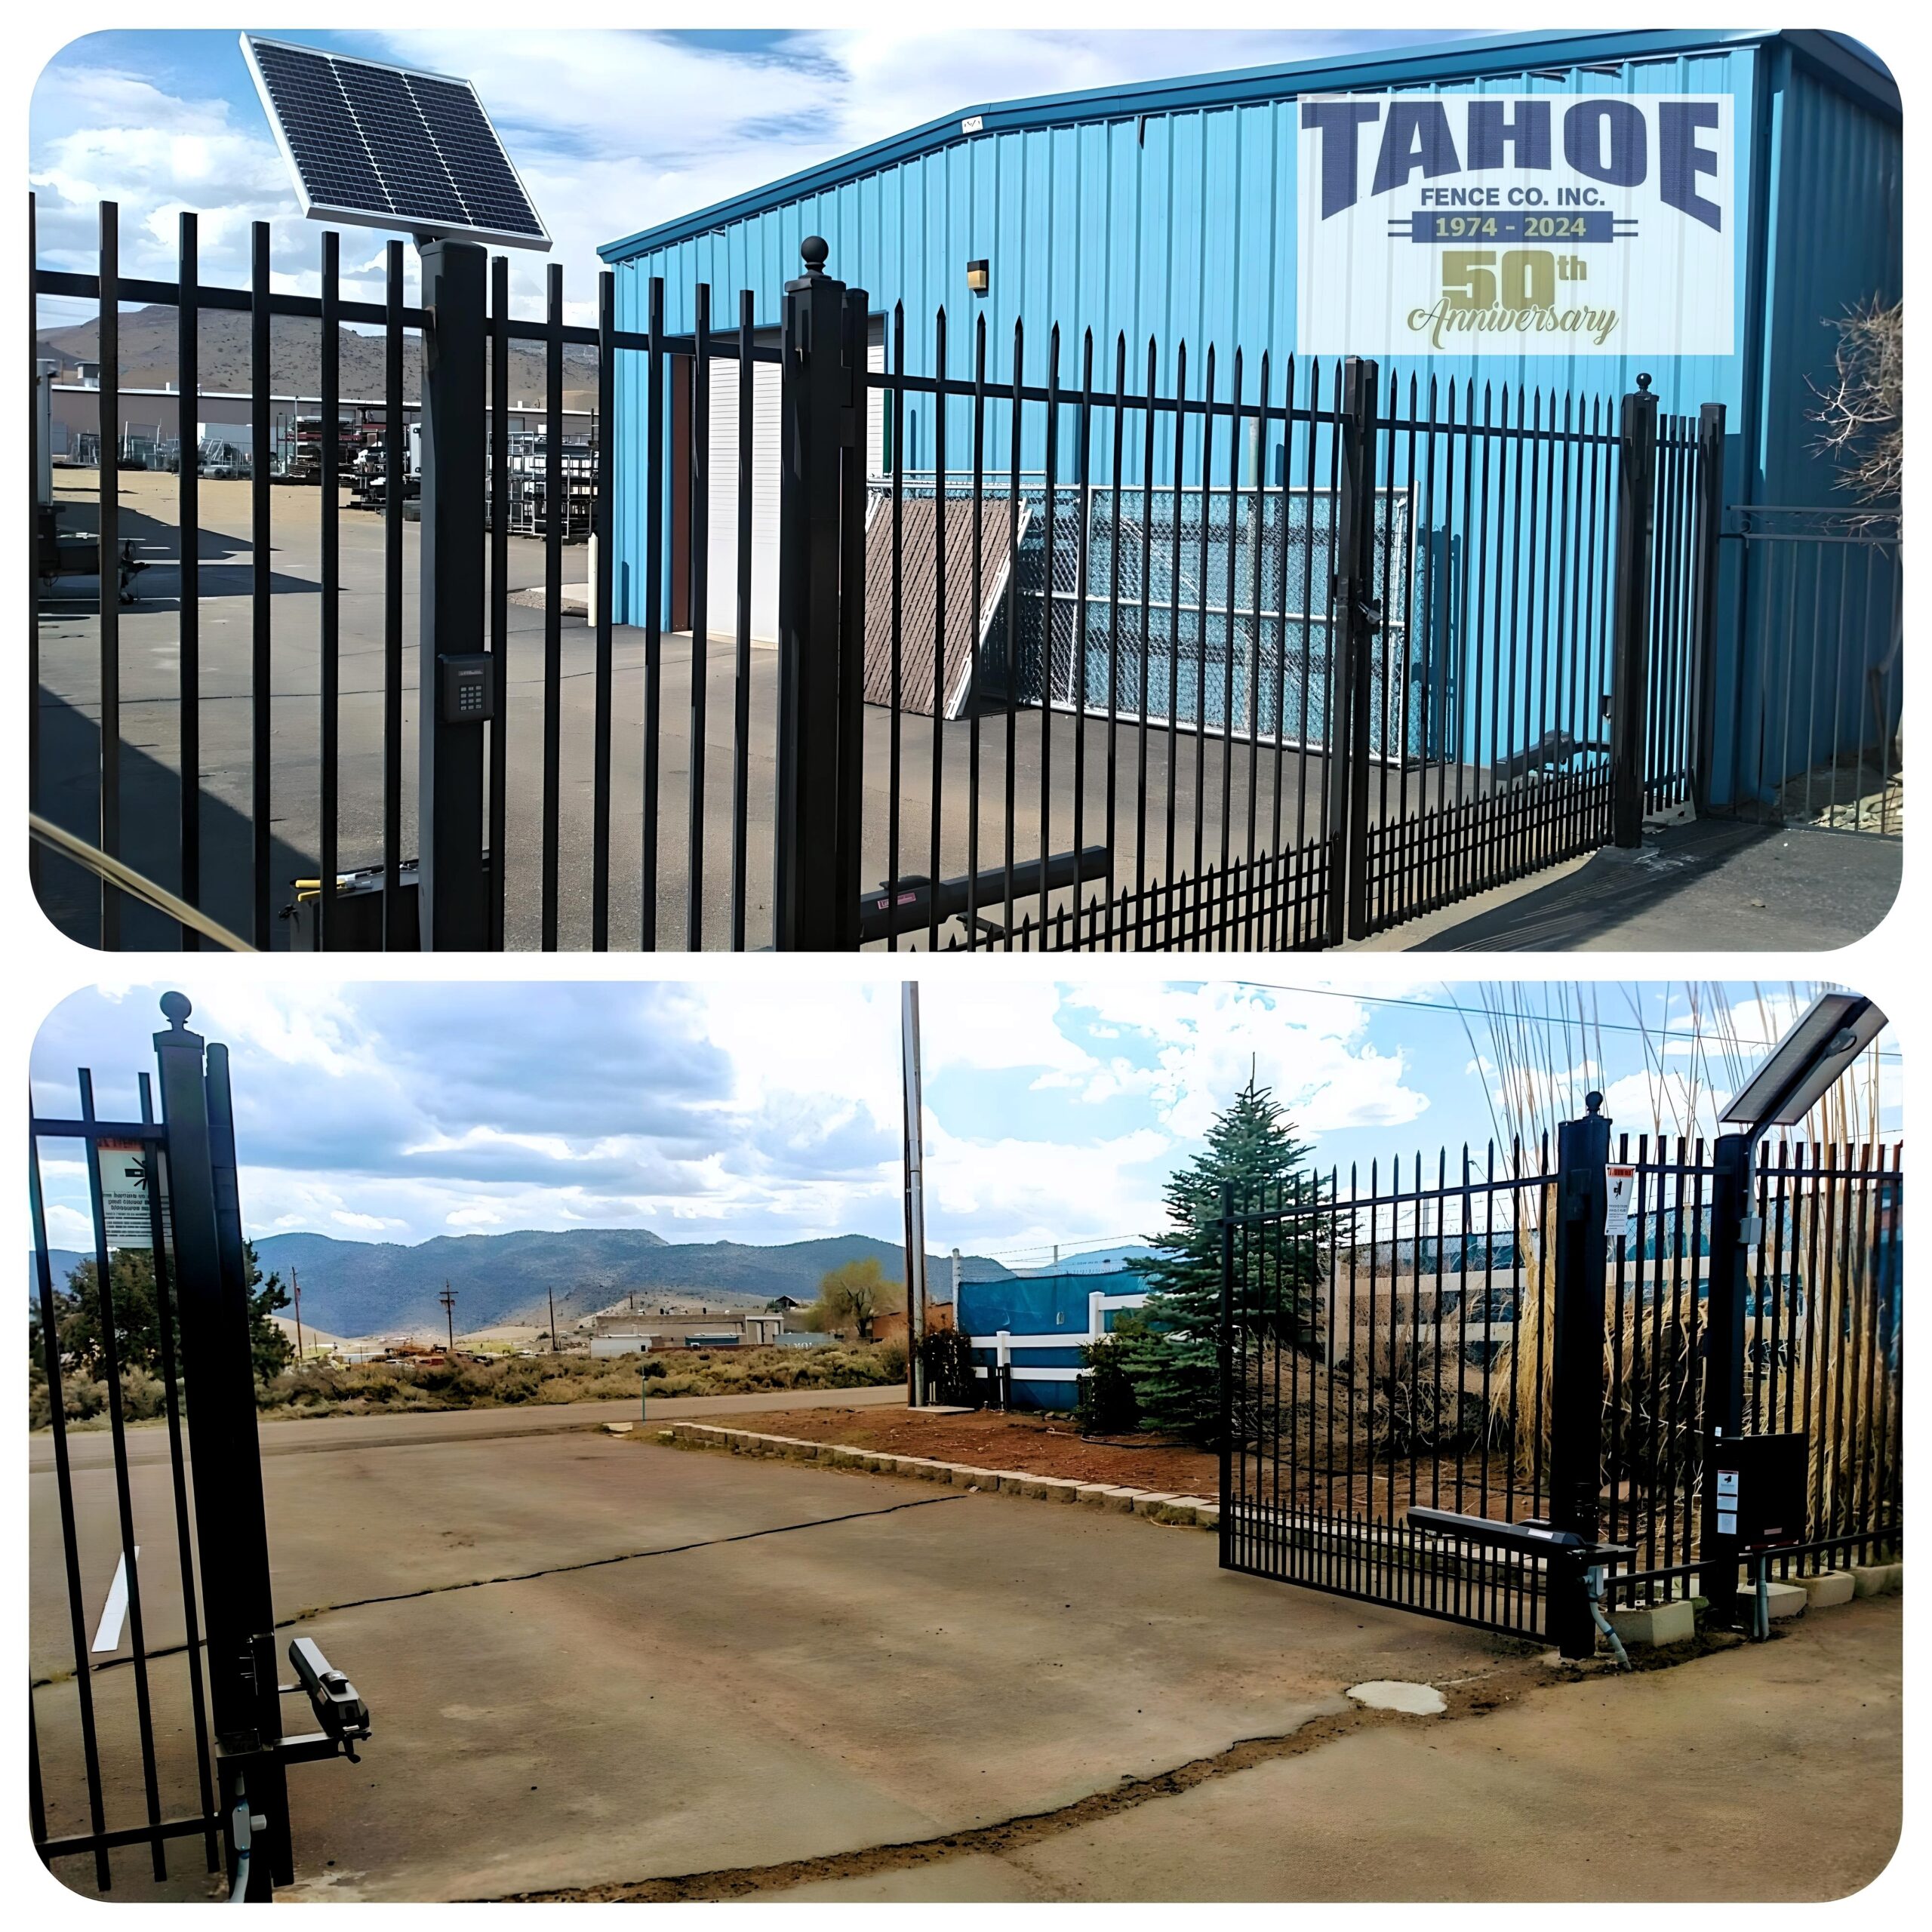 Bright Side No doubt this week has been hot. Heat wave or not, it's almost too much for Spring. On the bright side, if your driveway has good sun exposure, it could be ideal for solar-powered entry gates. Like these automated, ornamental iron swing gates by Tahoe in Mound House (Lyon County.) The solar panel uses the sun's light to charge the batteries that operate the gates. Even at night, the gates work on the energy stored from the sun.